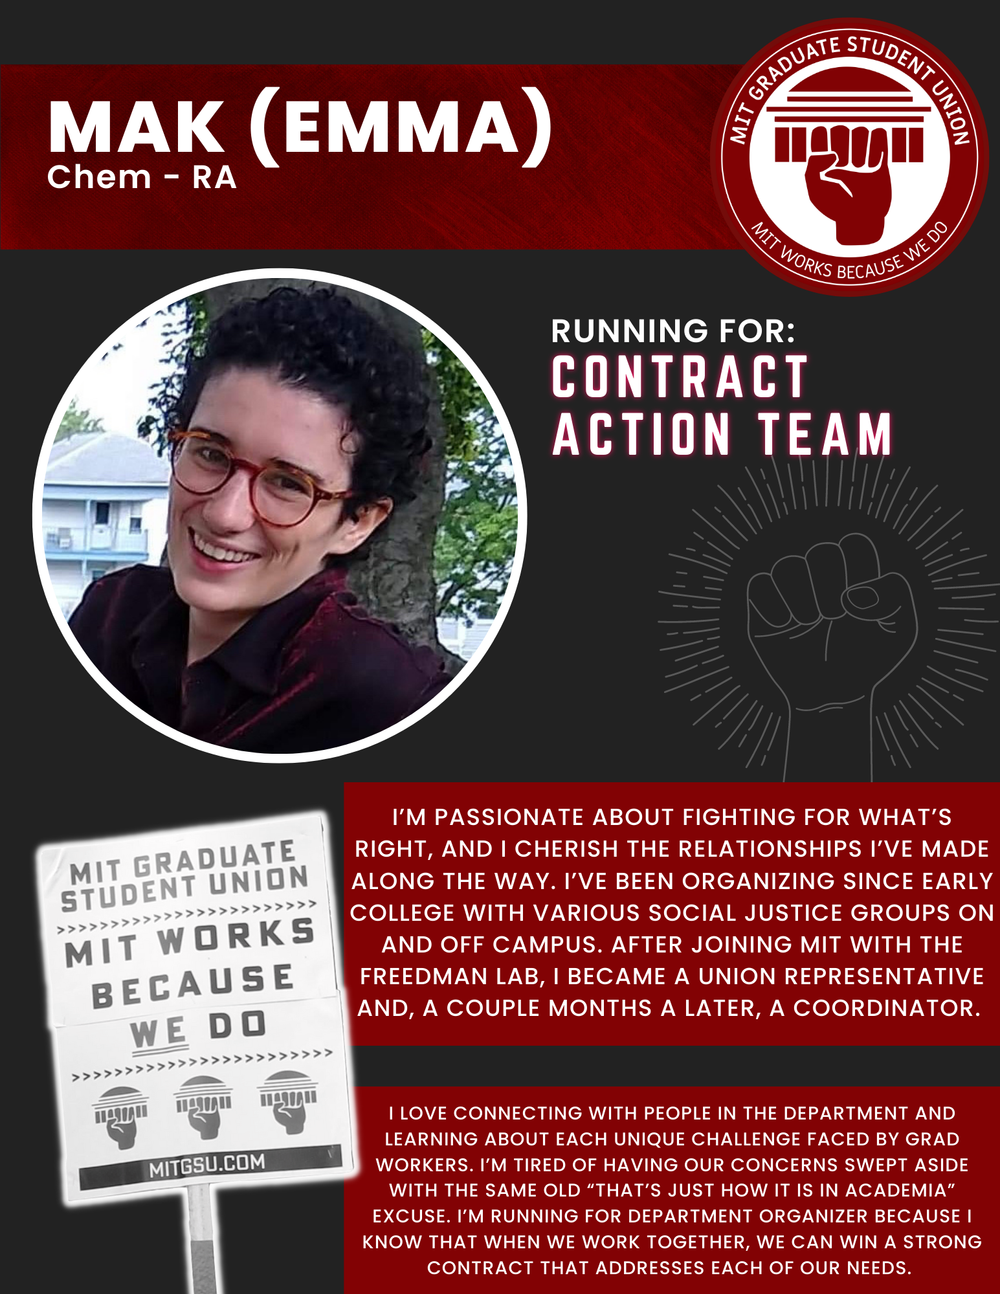  MAK (EMMA)  Chem - RA   RUNNING FOR: Contract Action Team  I’M PASSIONATE ABOUT FIGHTING FOR WHAT’S RIGHT, AND I CHERISH THE RELATIONSHIPS I’VE MADE ALONG THE WAY. I’VE BEEN ORGANIZING SINCE EARLY COLLEGE WITH VARIOUS SOCIAL JUSTICE GROUPS ON AND OF